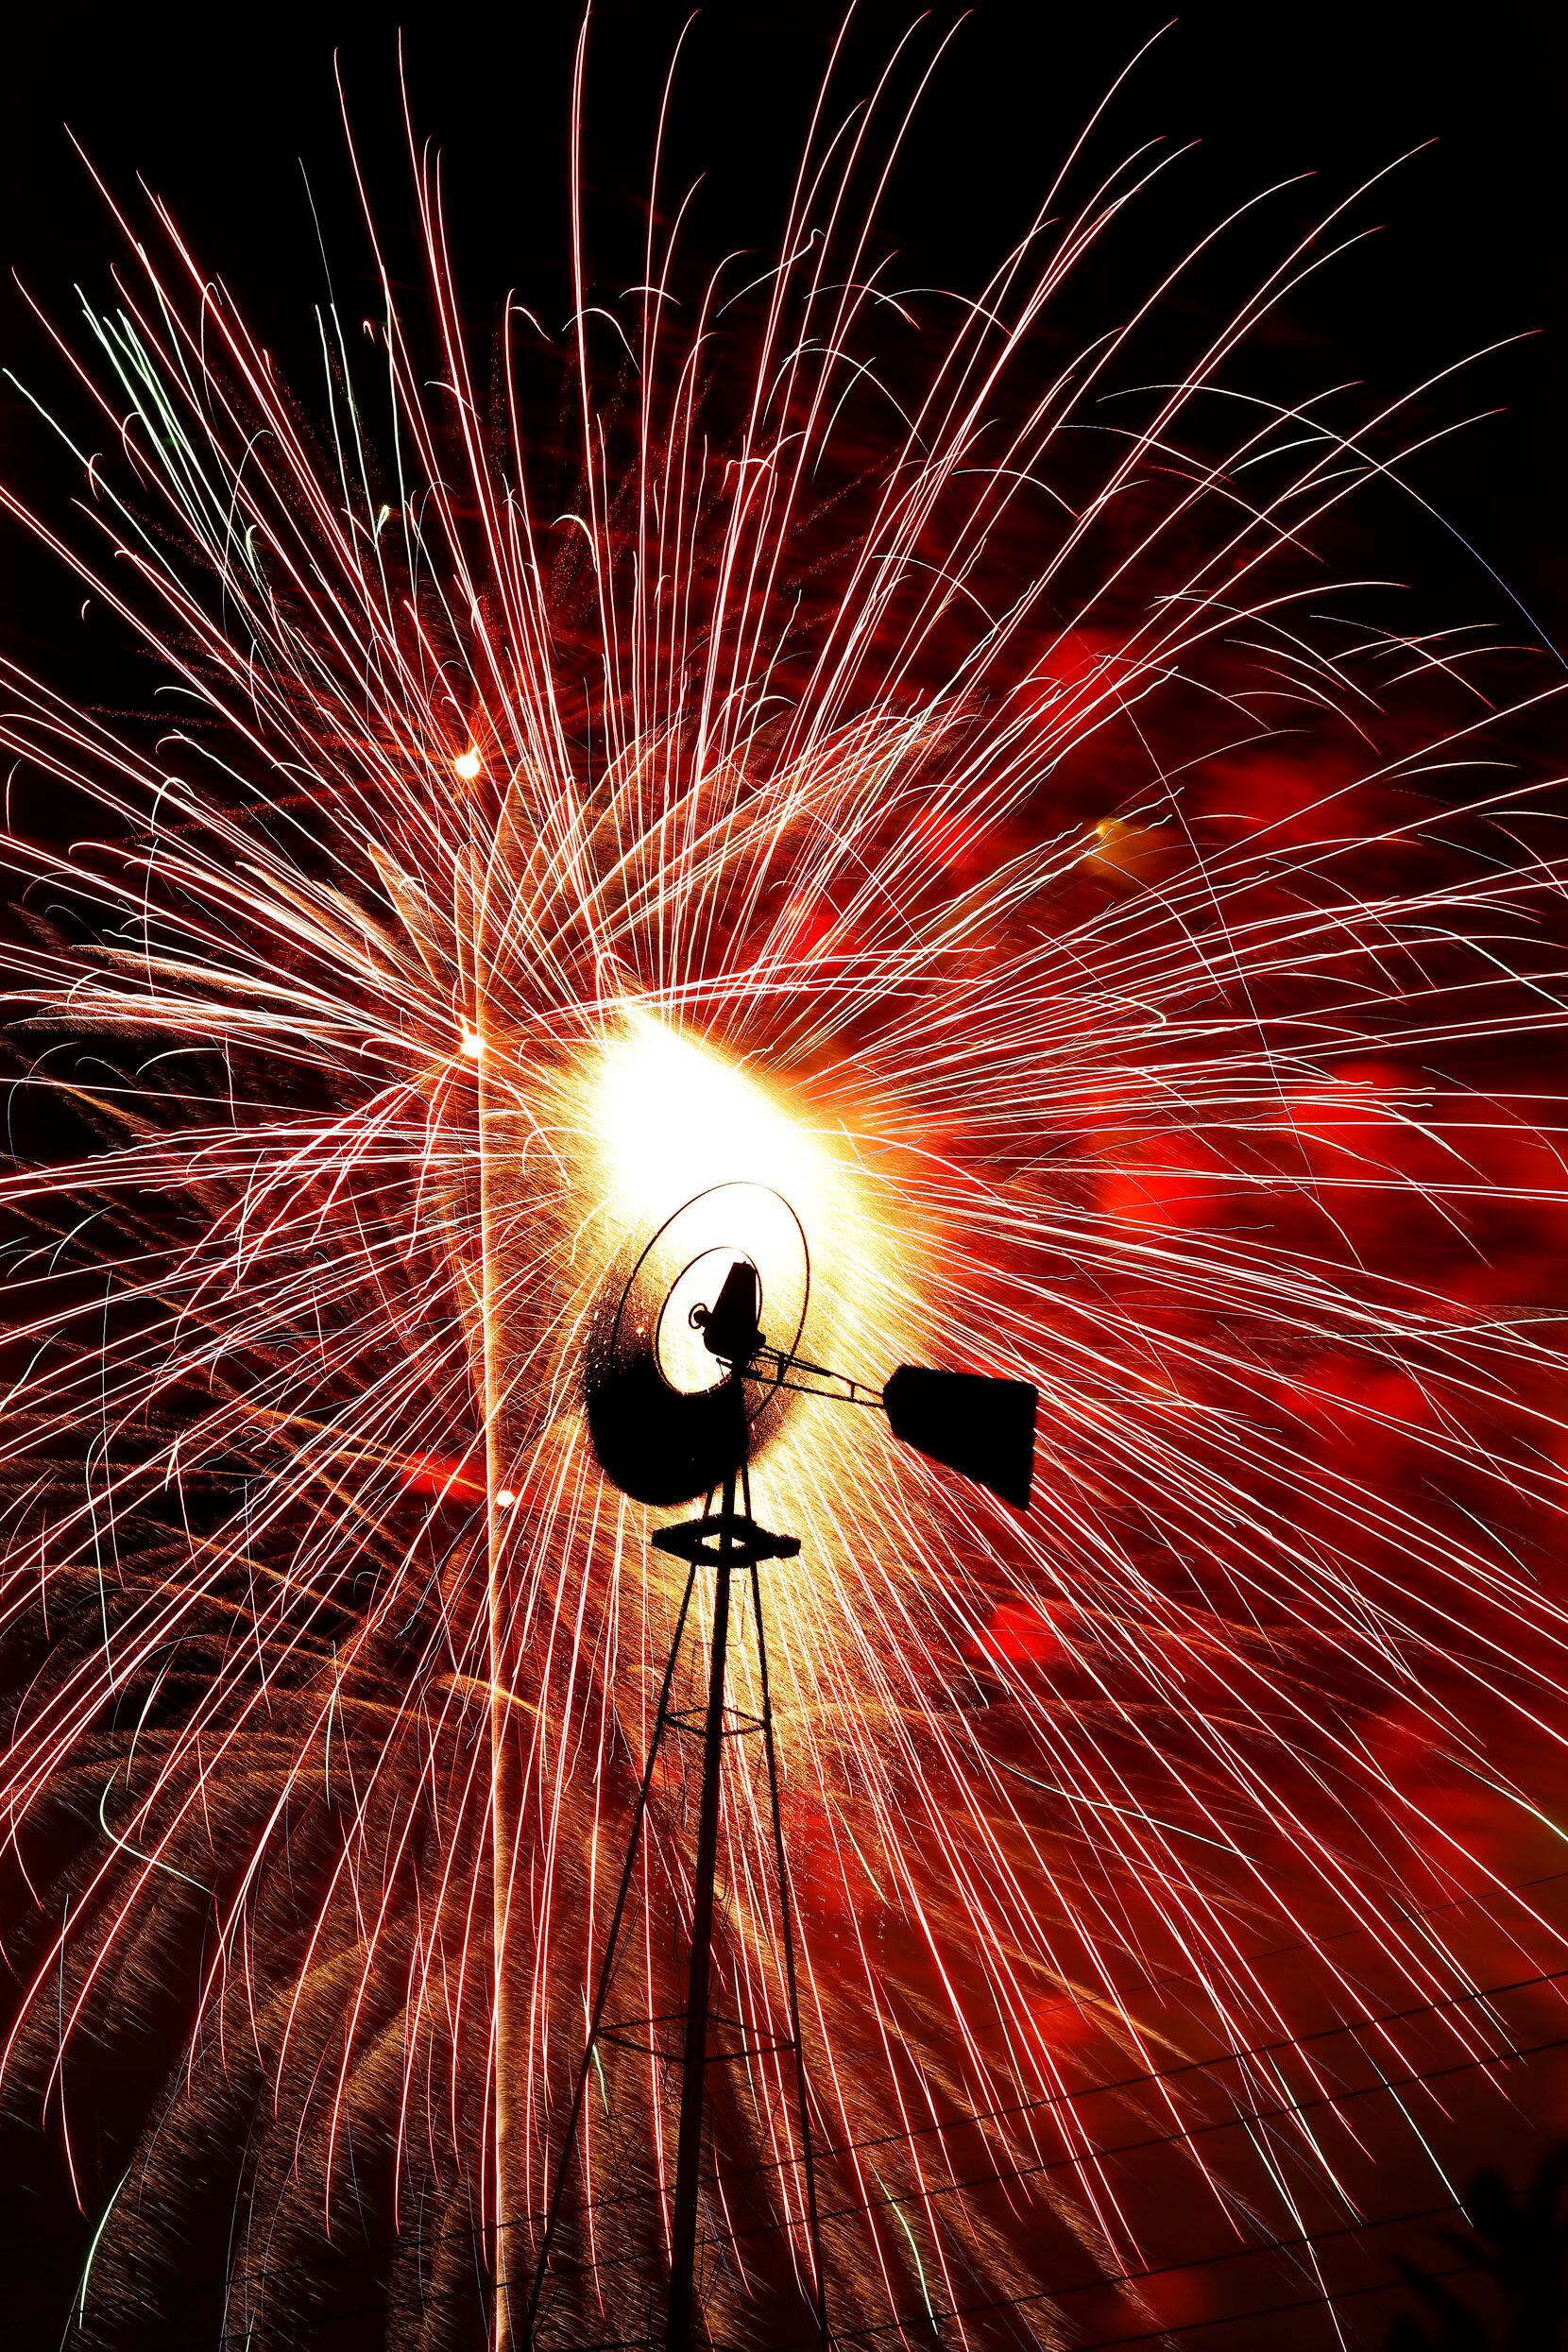 Fireworks exploded over a spinning windmill on July 3 at Addison’s Kaboom Town festival....